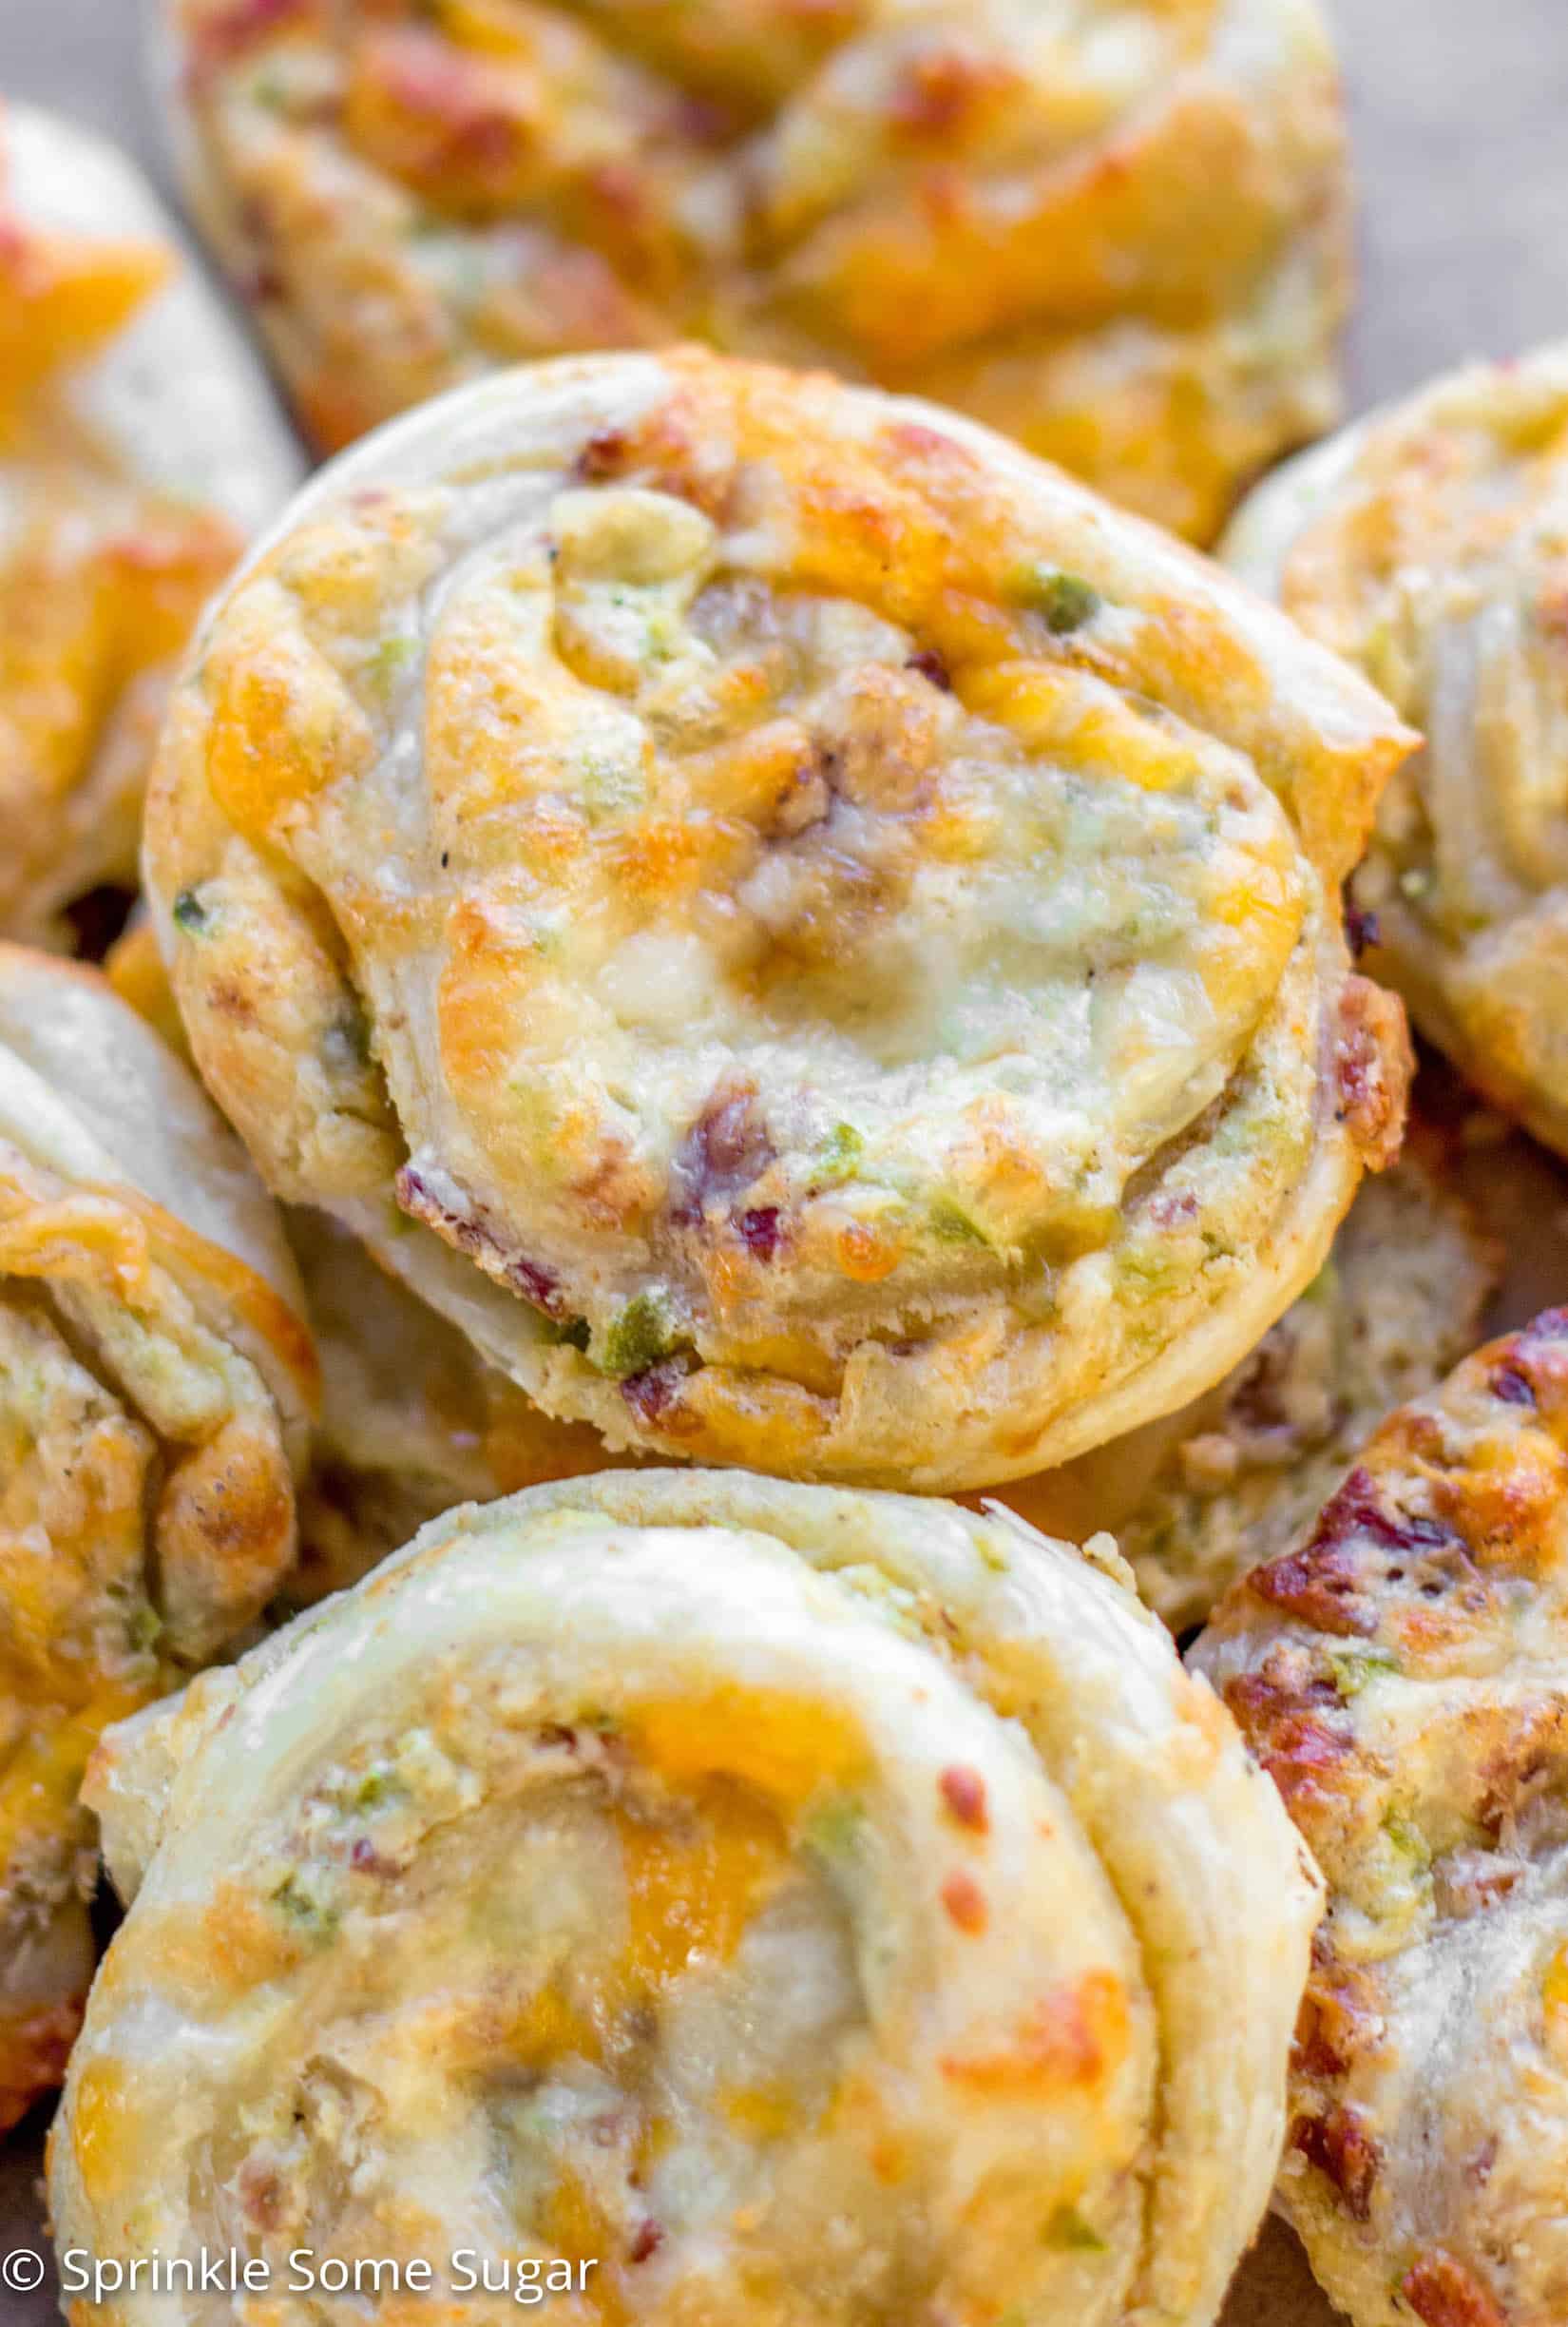 Cheesy Jalapenño Popper Pinwheels - These cheesy jalapeño popper pinwheels incorporate everything you love about a traditional jalapeño popper, all wrapped up in sweet puff pastry dough!